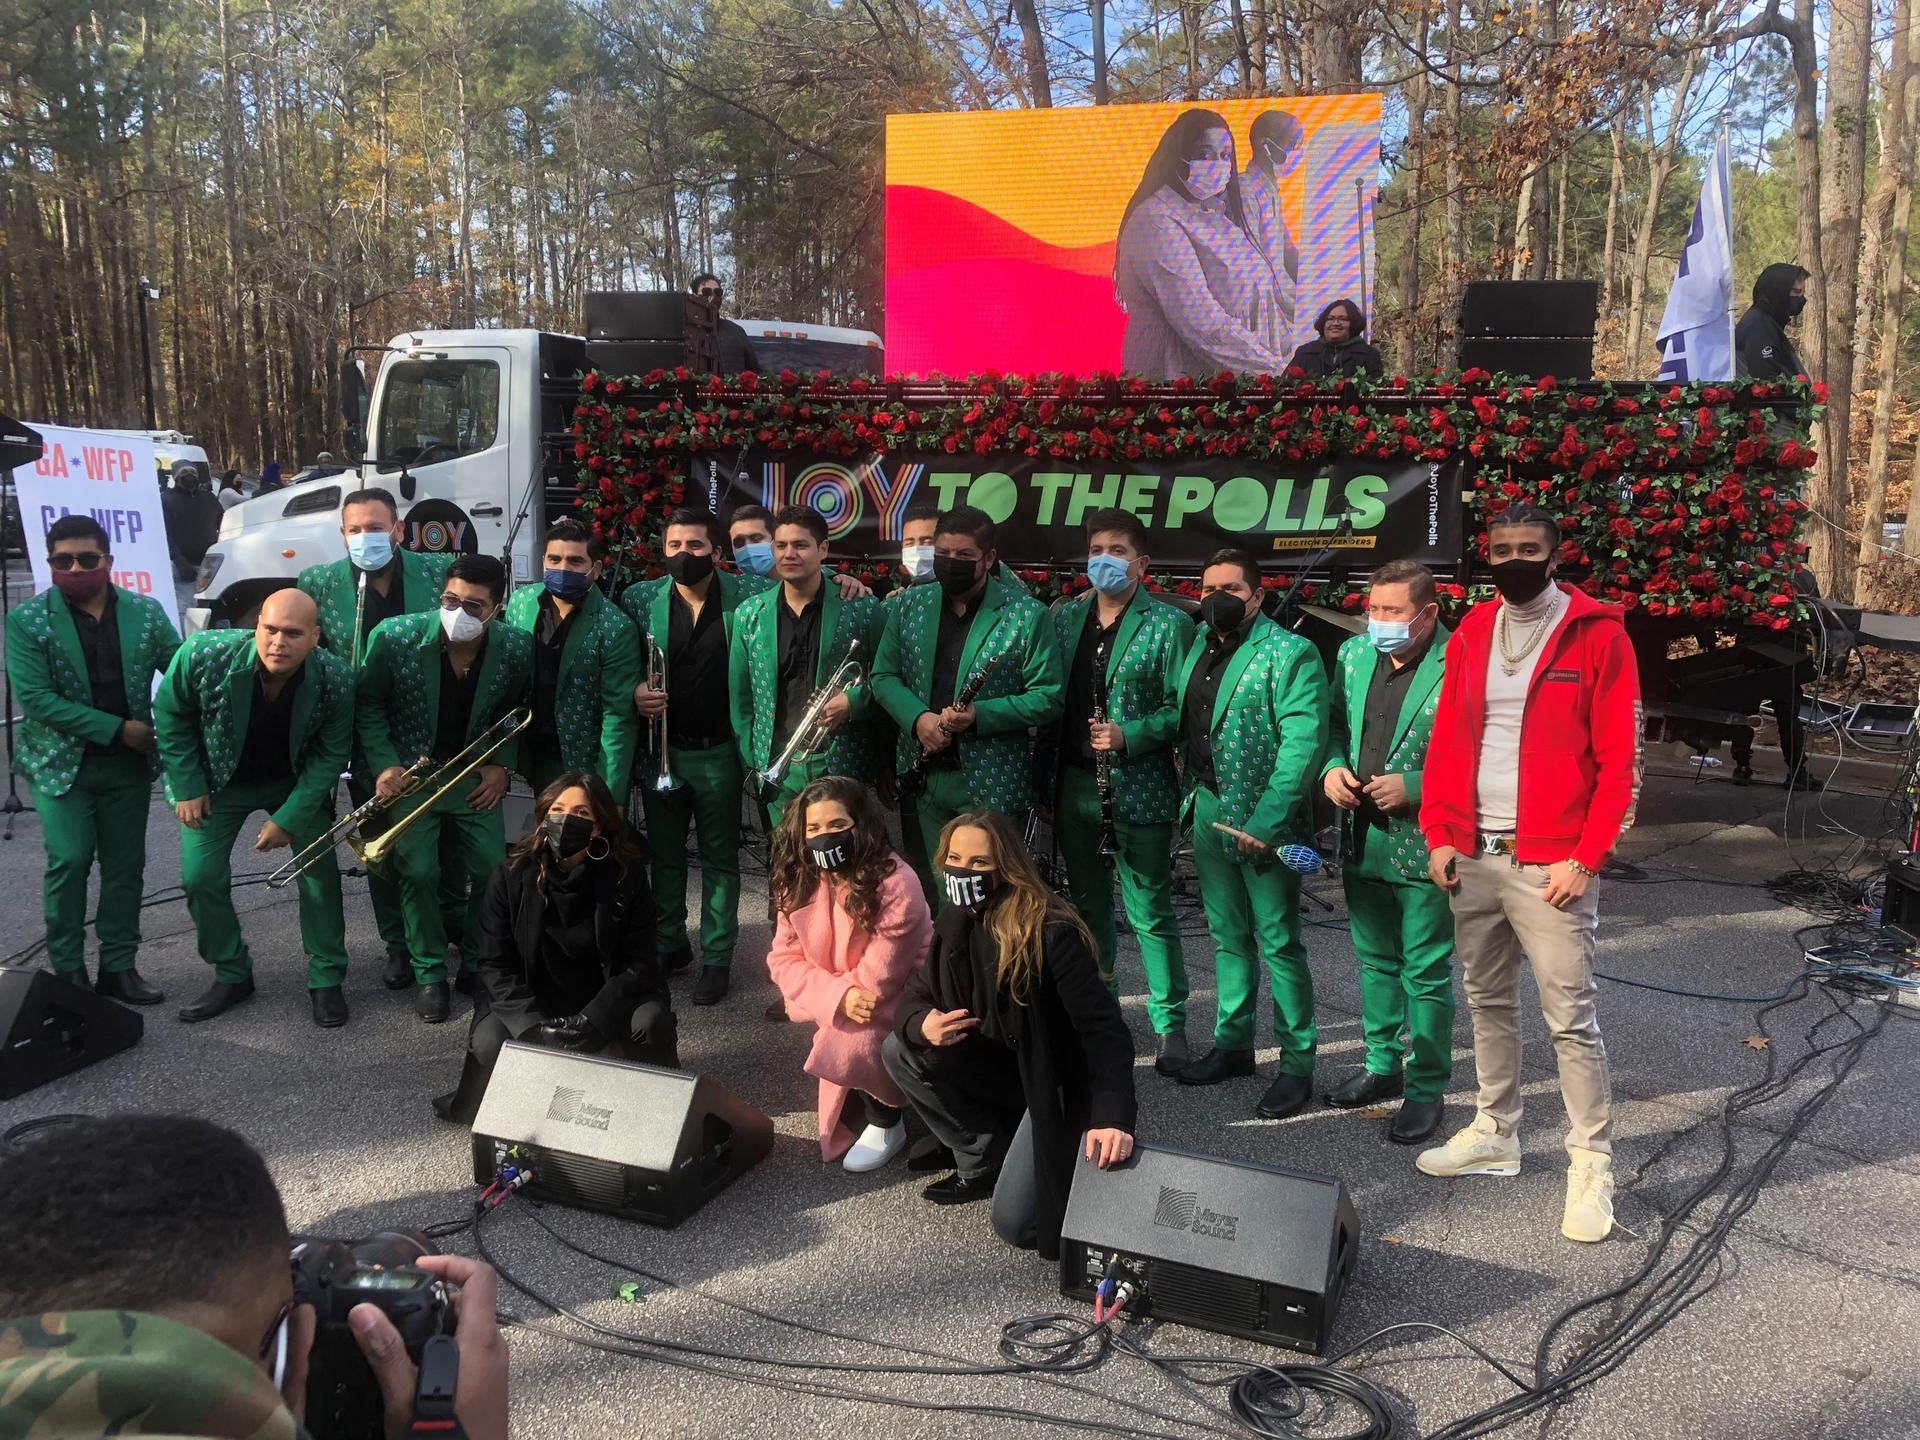 A group of musicians wearing green uniforms and other actors and musicians stand outside together. 